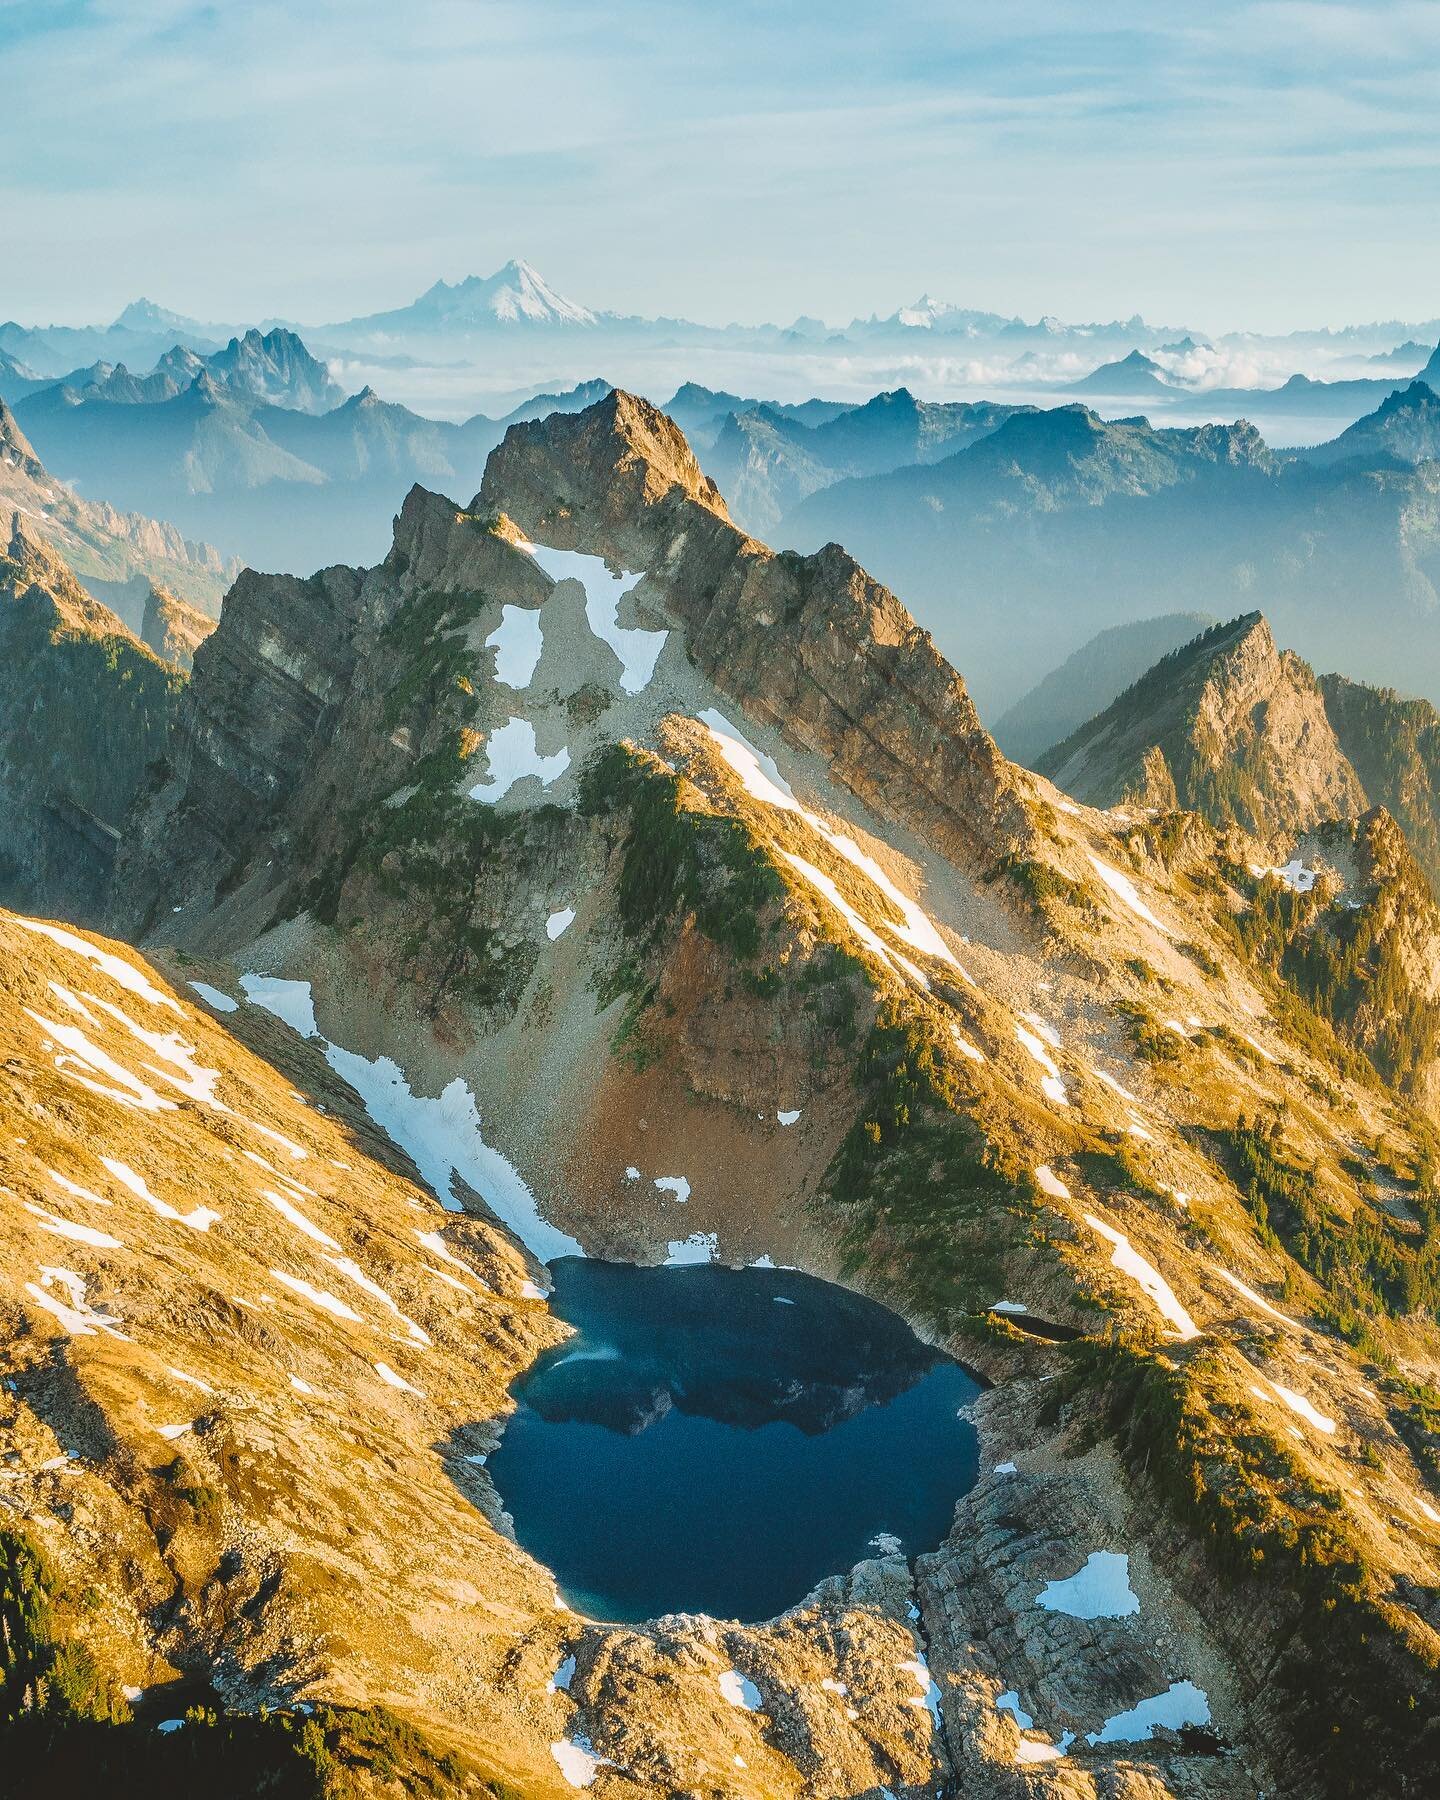 From a beautiful summer morning in the North Cascades - surrounded by a sea of peaks, looking out at a mountain I had stood on the evening before.

It&rsquo;s too easy to miss times like these amidst the cold and gloom of PNW winter. And honestly, I 